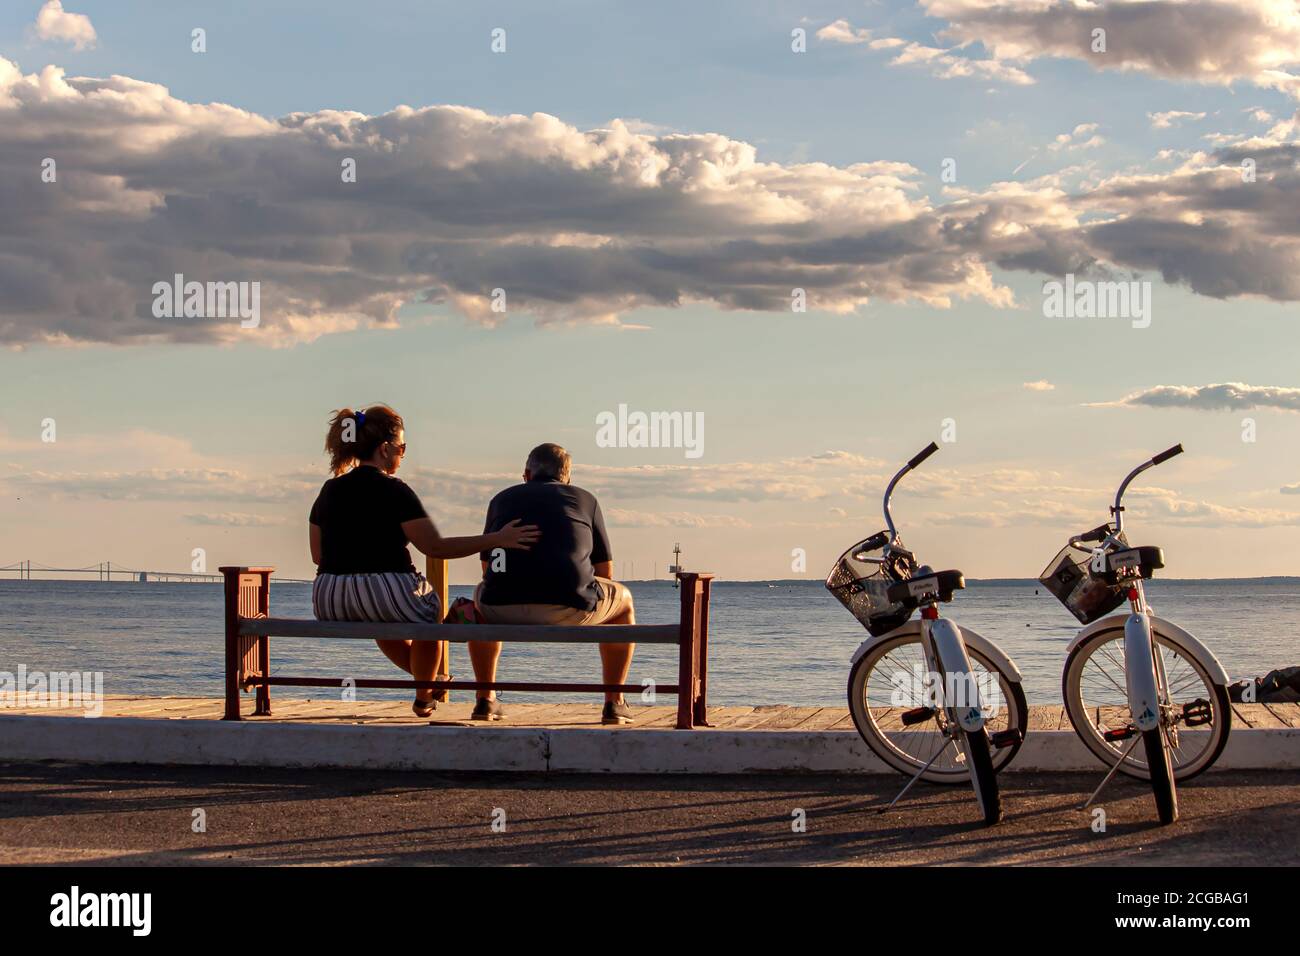 Rock Hall, MD, USA 08/30/2020: A middle aged caucasian couple is sitting on a bench by the beach. They have their identical bikes parked next to them. Stock Photo